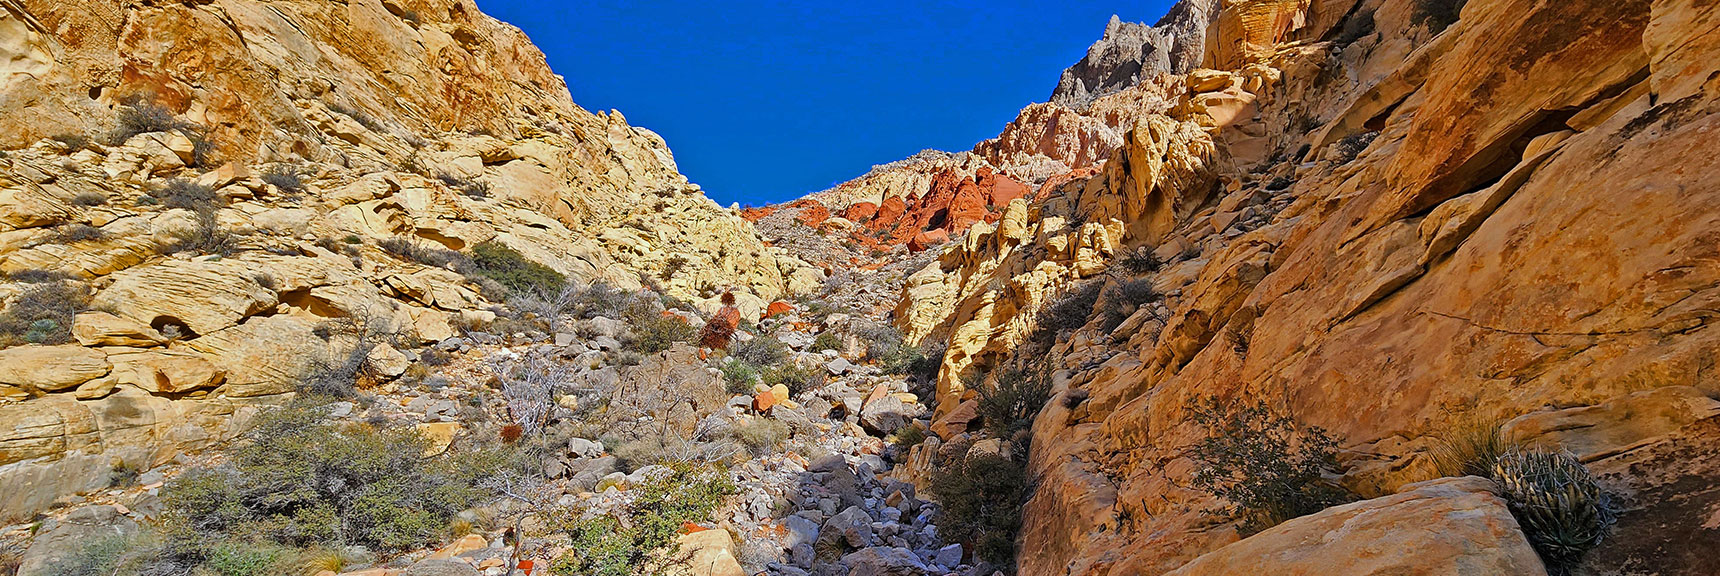 A Faint Trail Will Soon Appear Along the Base of the Canyon Walls to the Right | Ash Canyon to Calico Tanks | Calico Basin and Red Rock Canyon, Nevada | David Smith | Las Vegas Area Trails